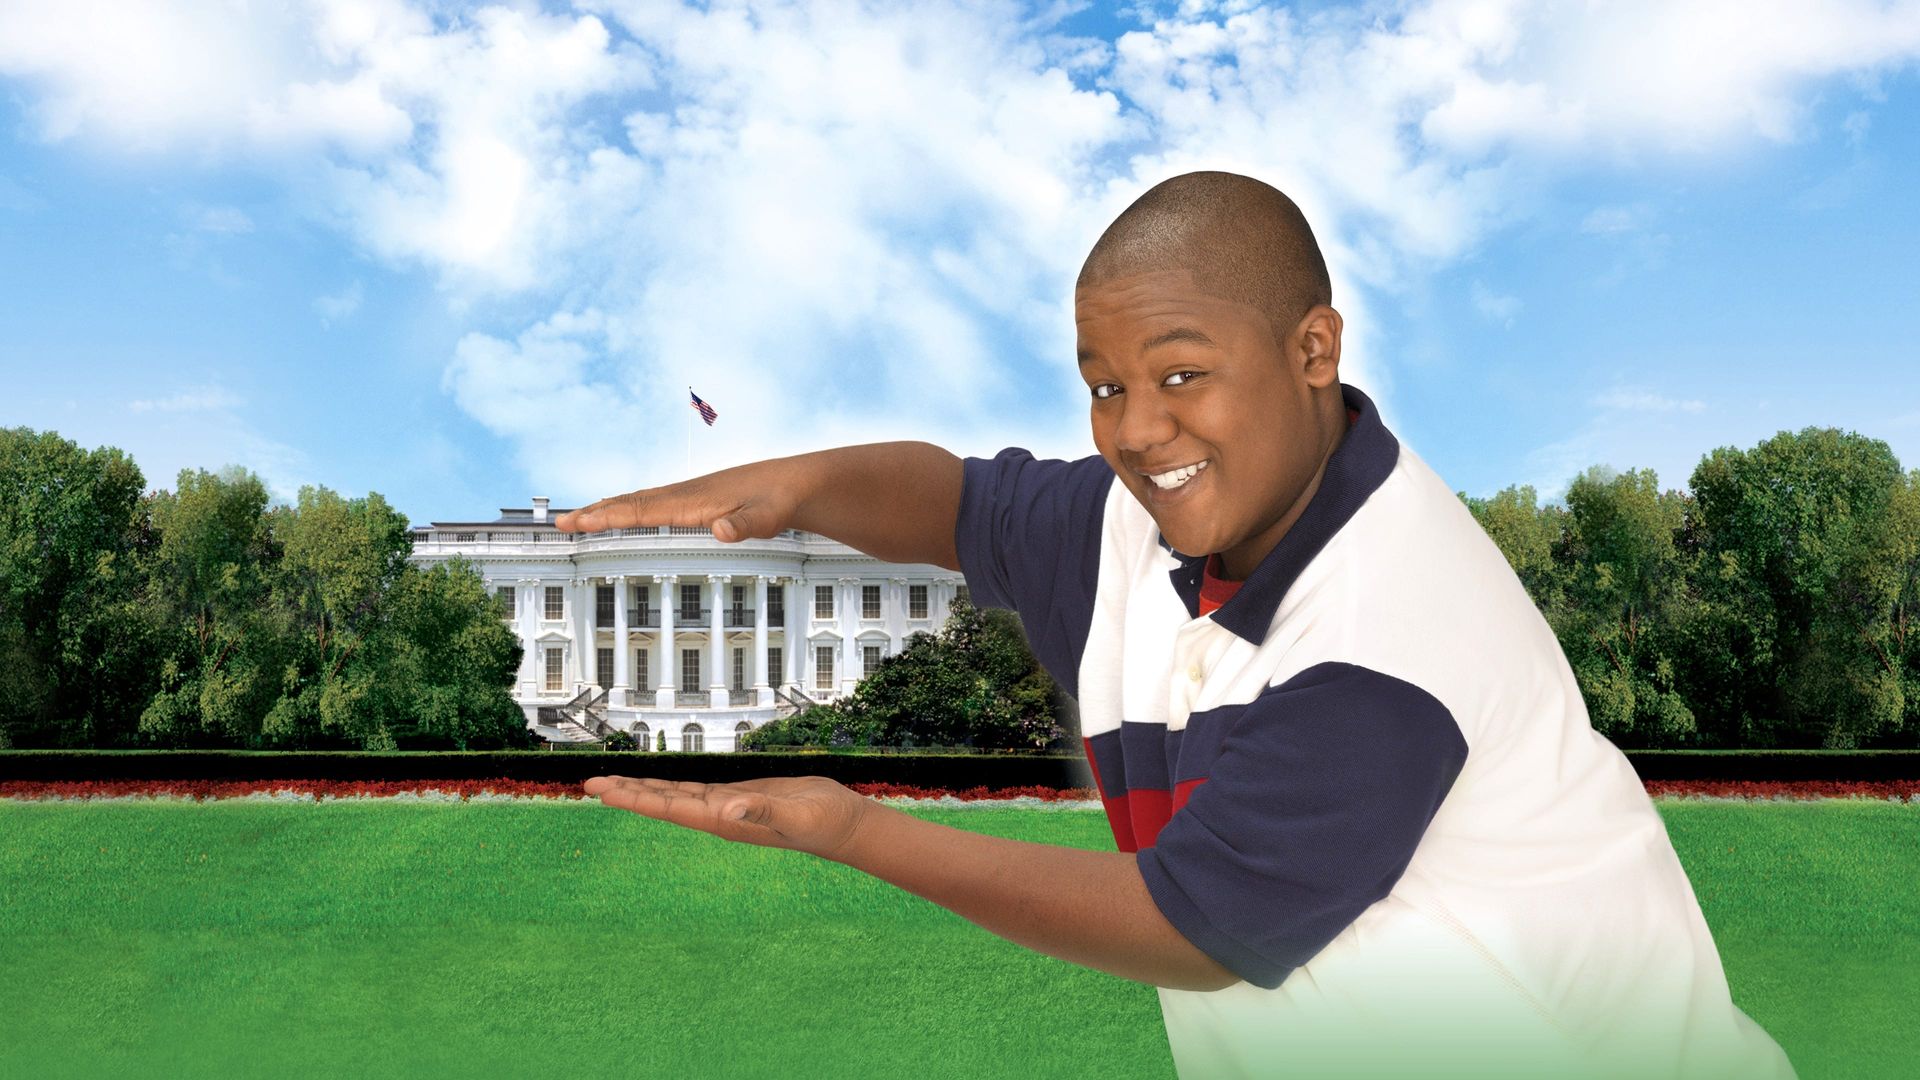 Cory in the House Backdrop